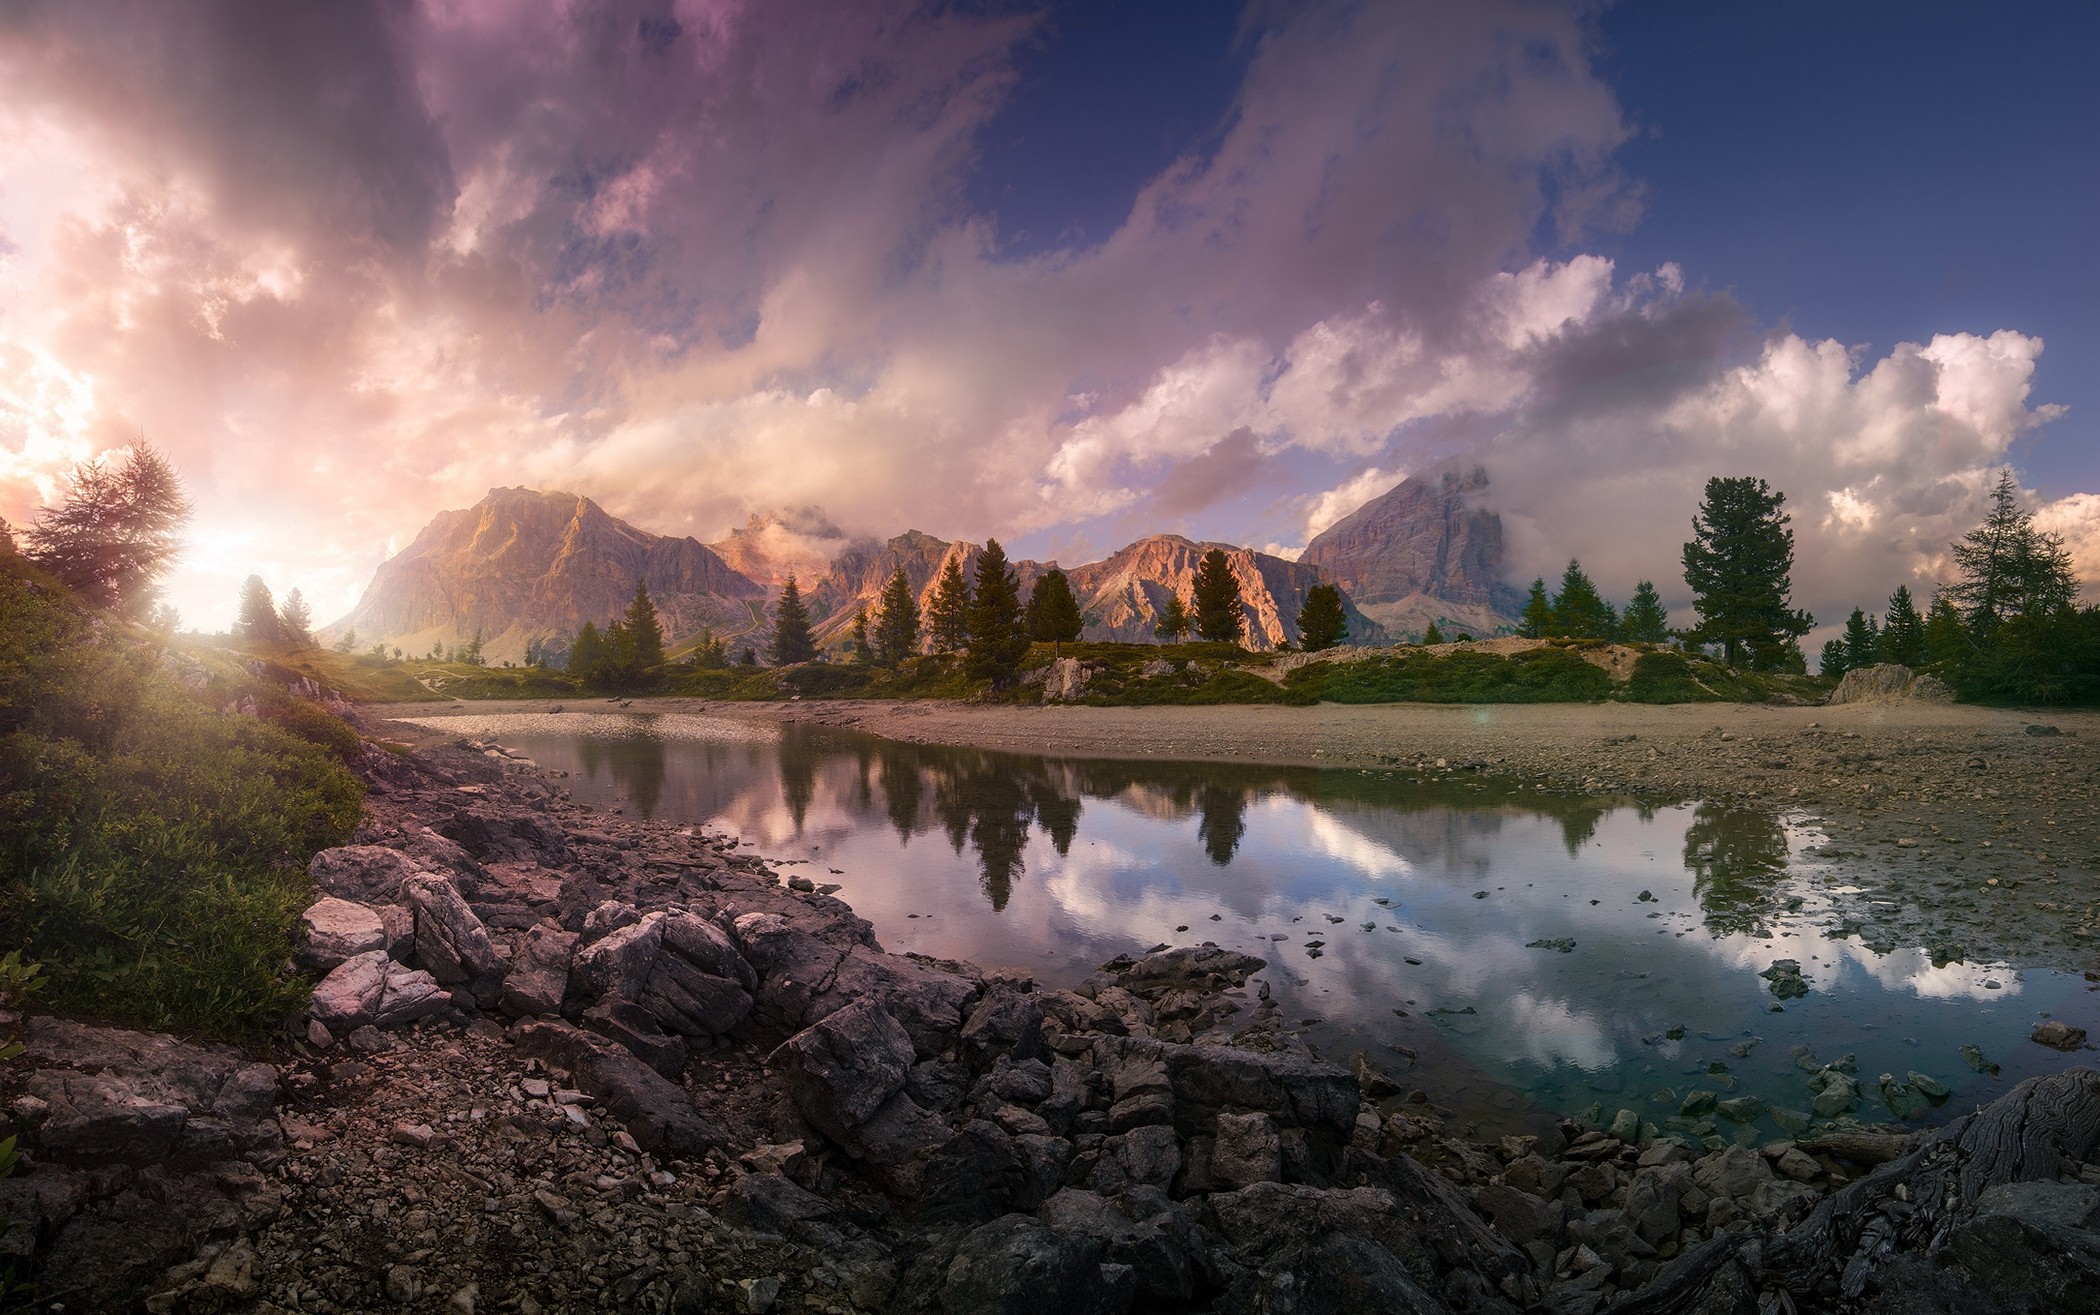 General 2100x1315 lake sunset mountains clouds Italy reflection nature trees sky landscape summer Europe rocks